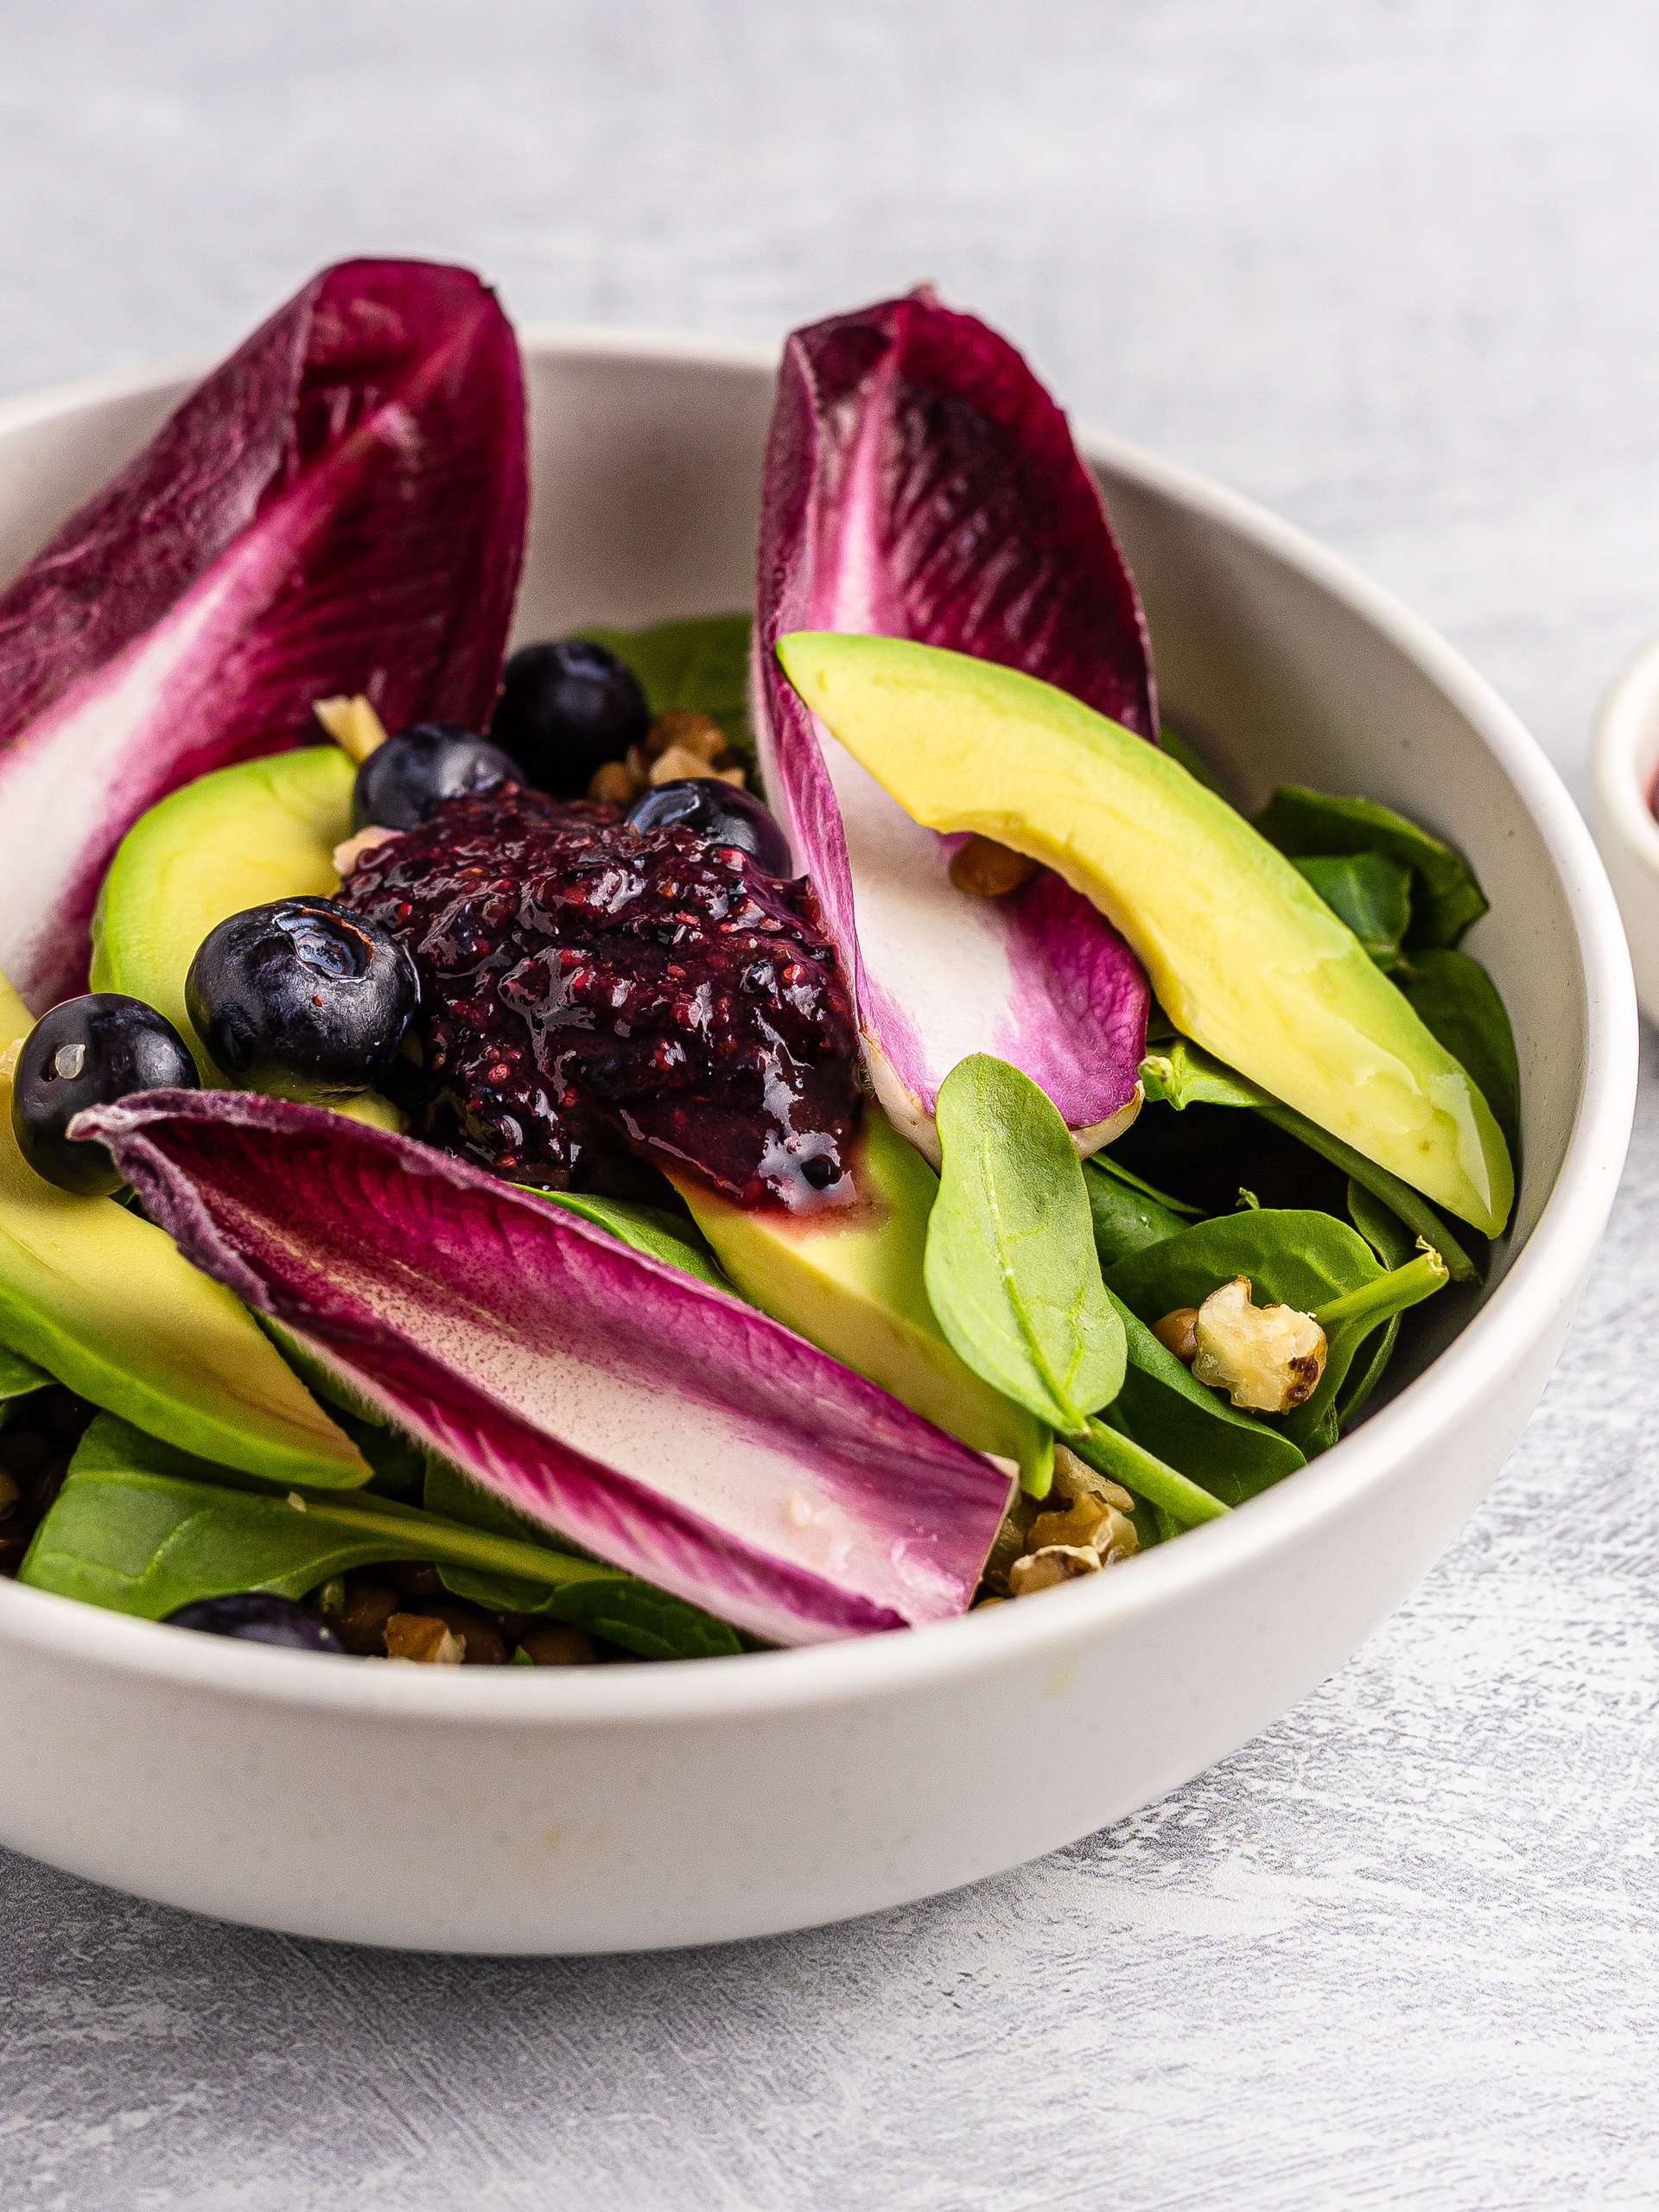 Red Chicory Salad with Blueberry Dressing